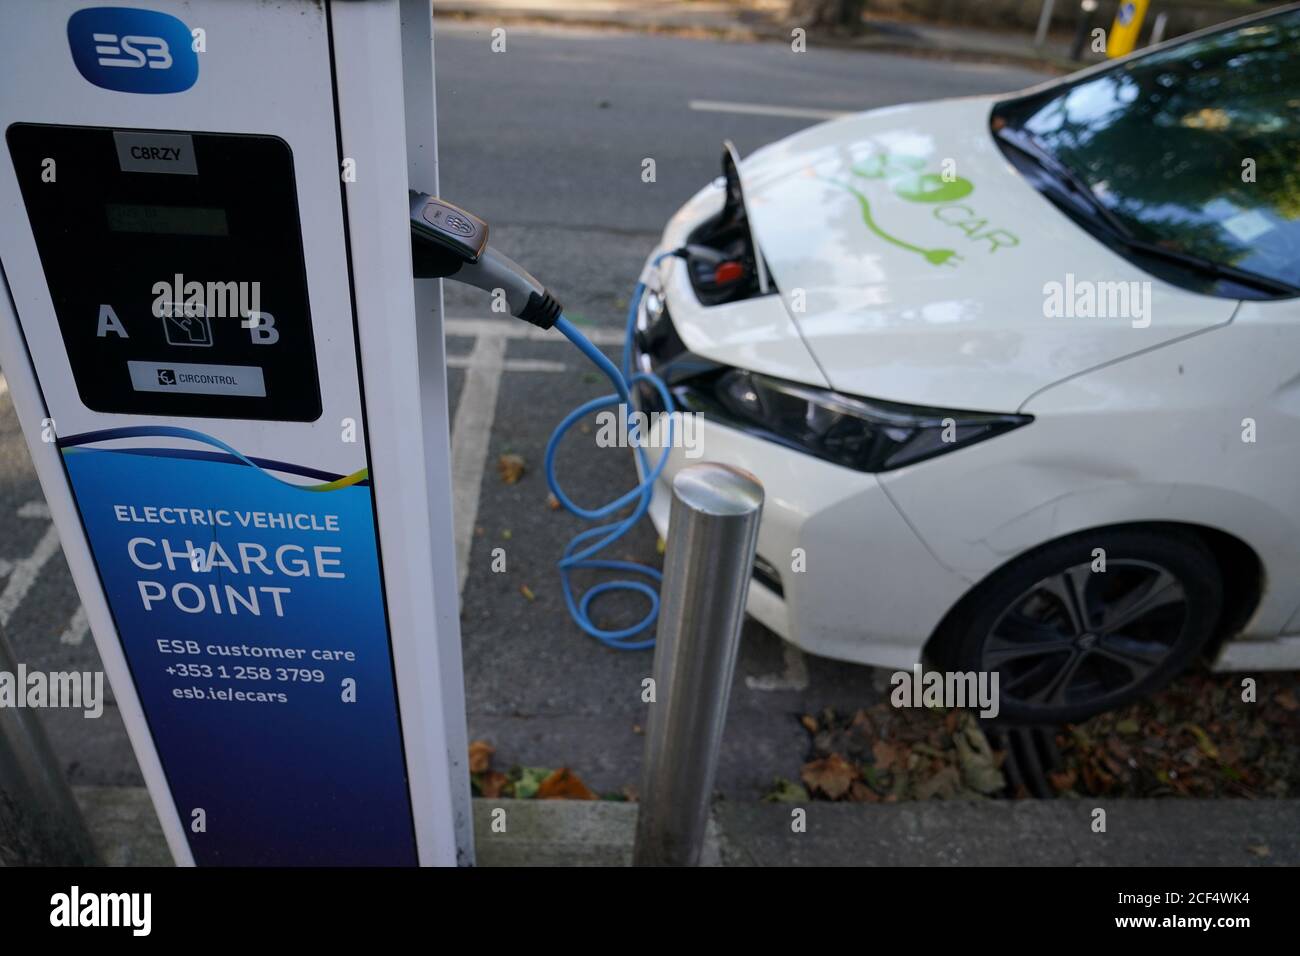 An ESB (Electricity Supply Board) electric vehicle charge point is seen in  use in Dublin, Ireland, September 3, 2020. REUTERS/Clodagh Kilcoyne Stock  Photo - Alamy